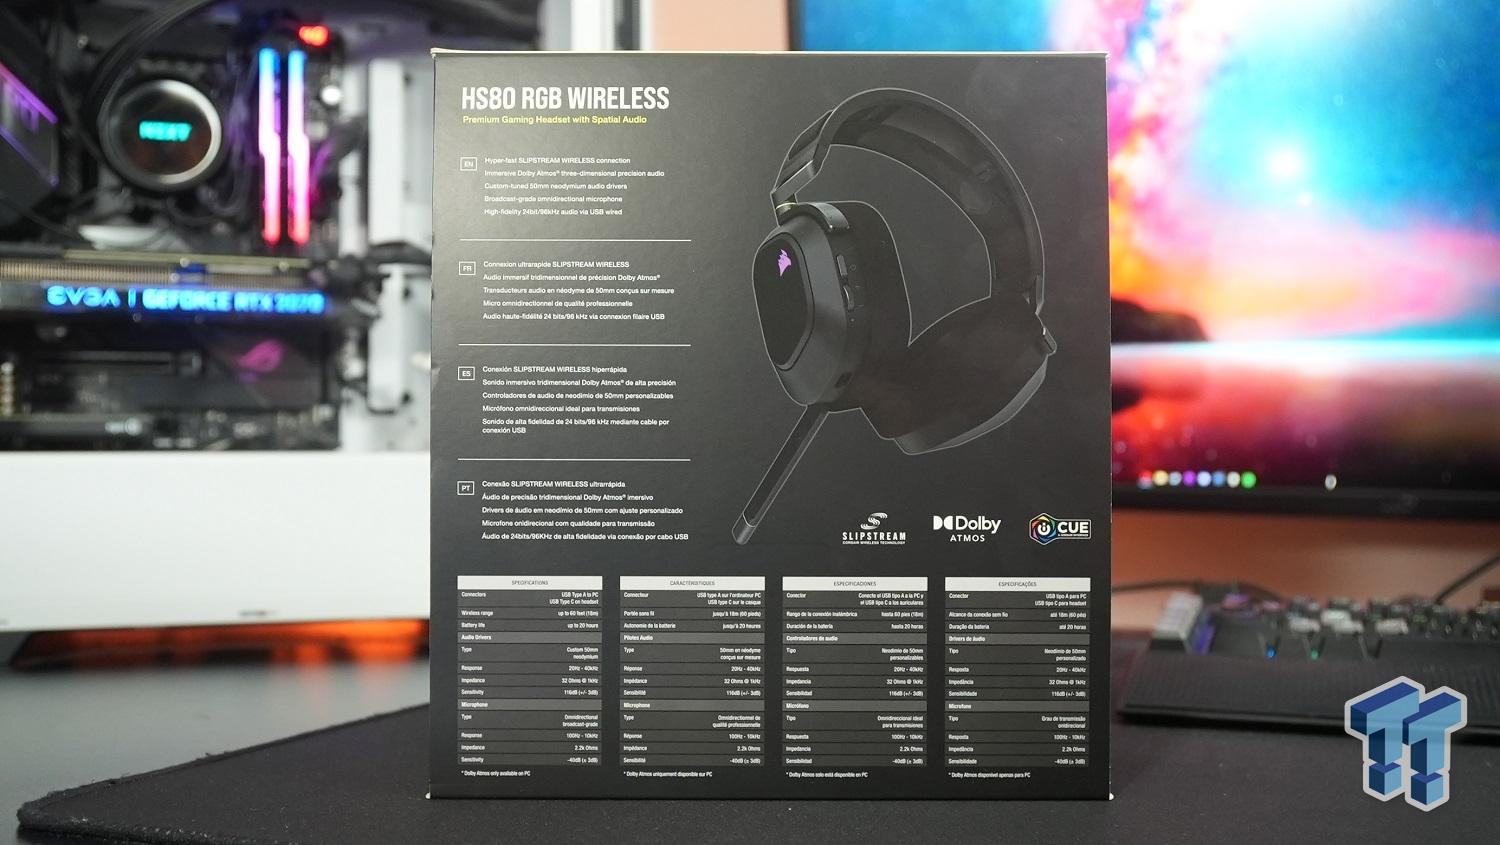 HS80 RGB WIRELESS Premium Gaming Headset with Spatial Audio